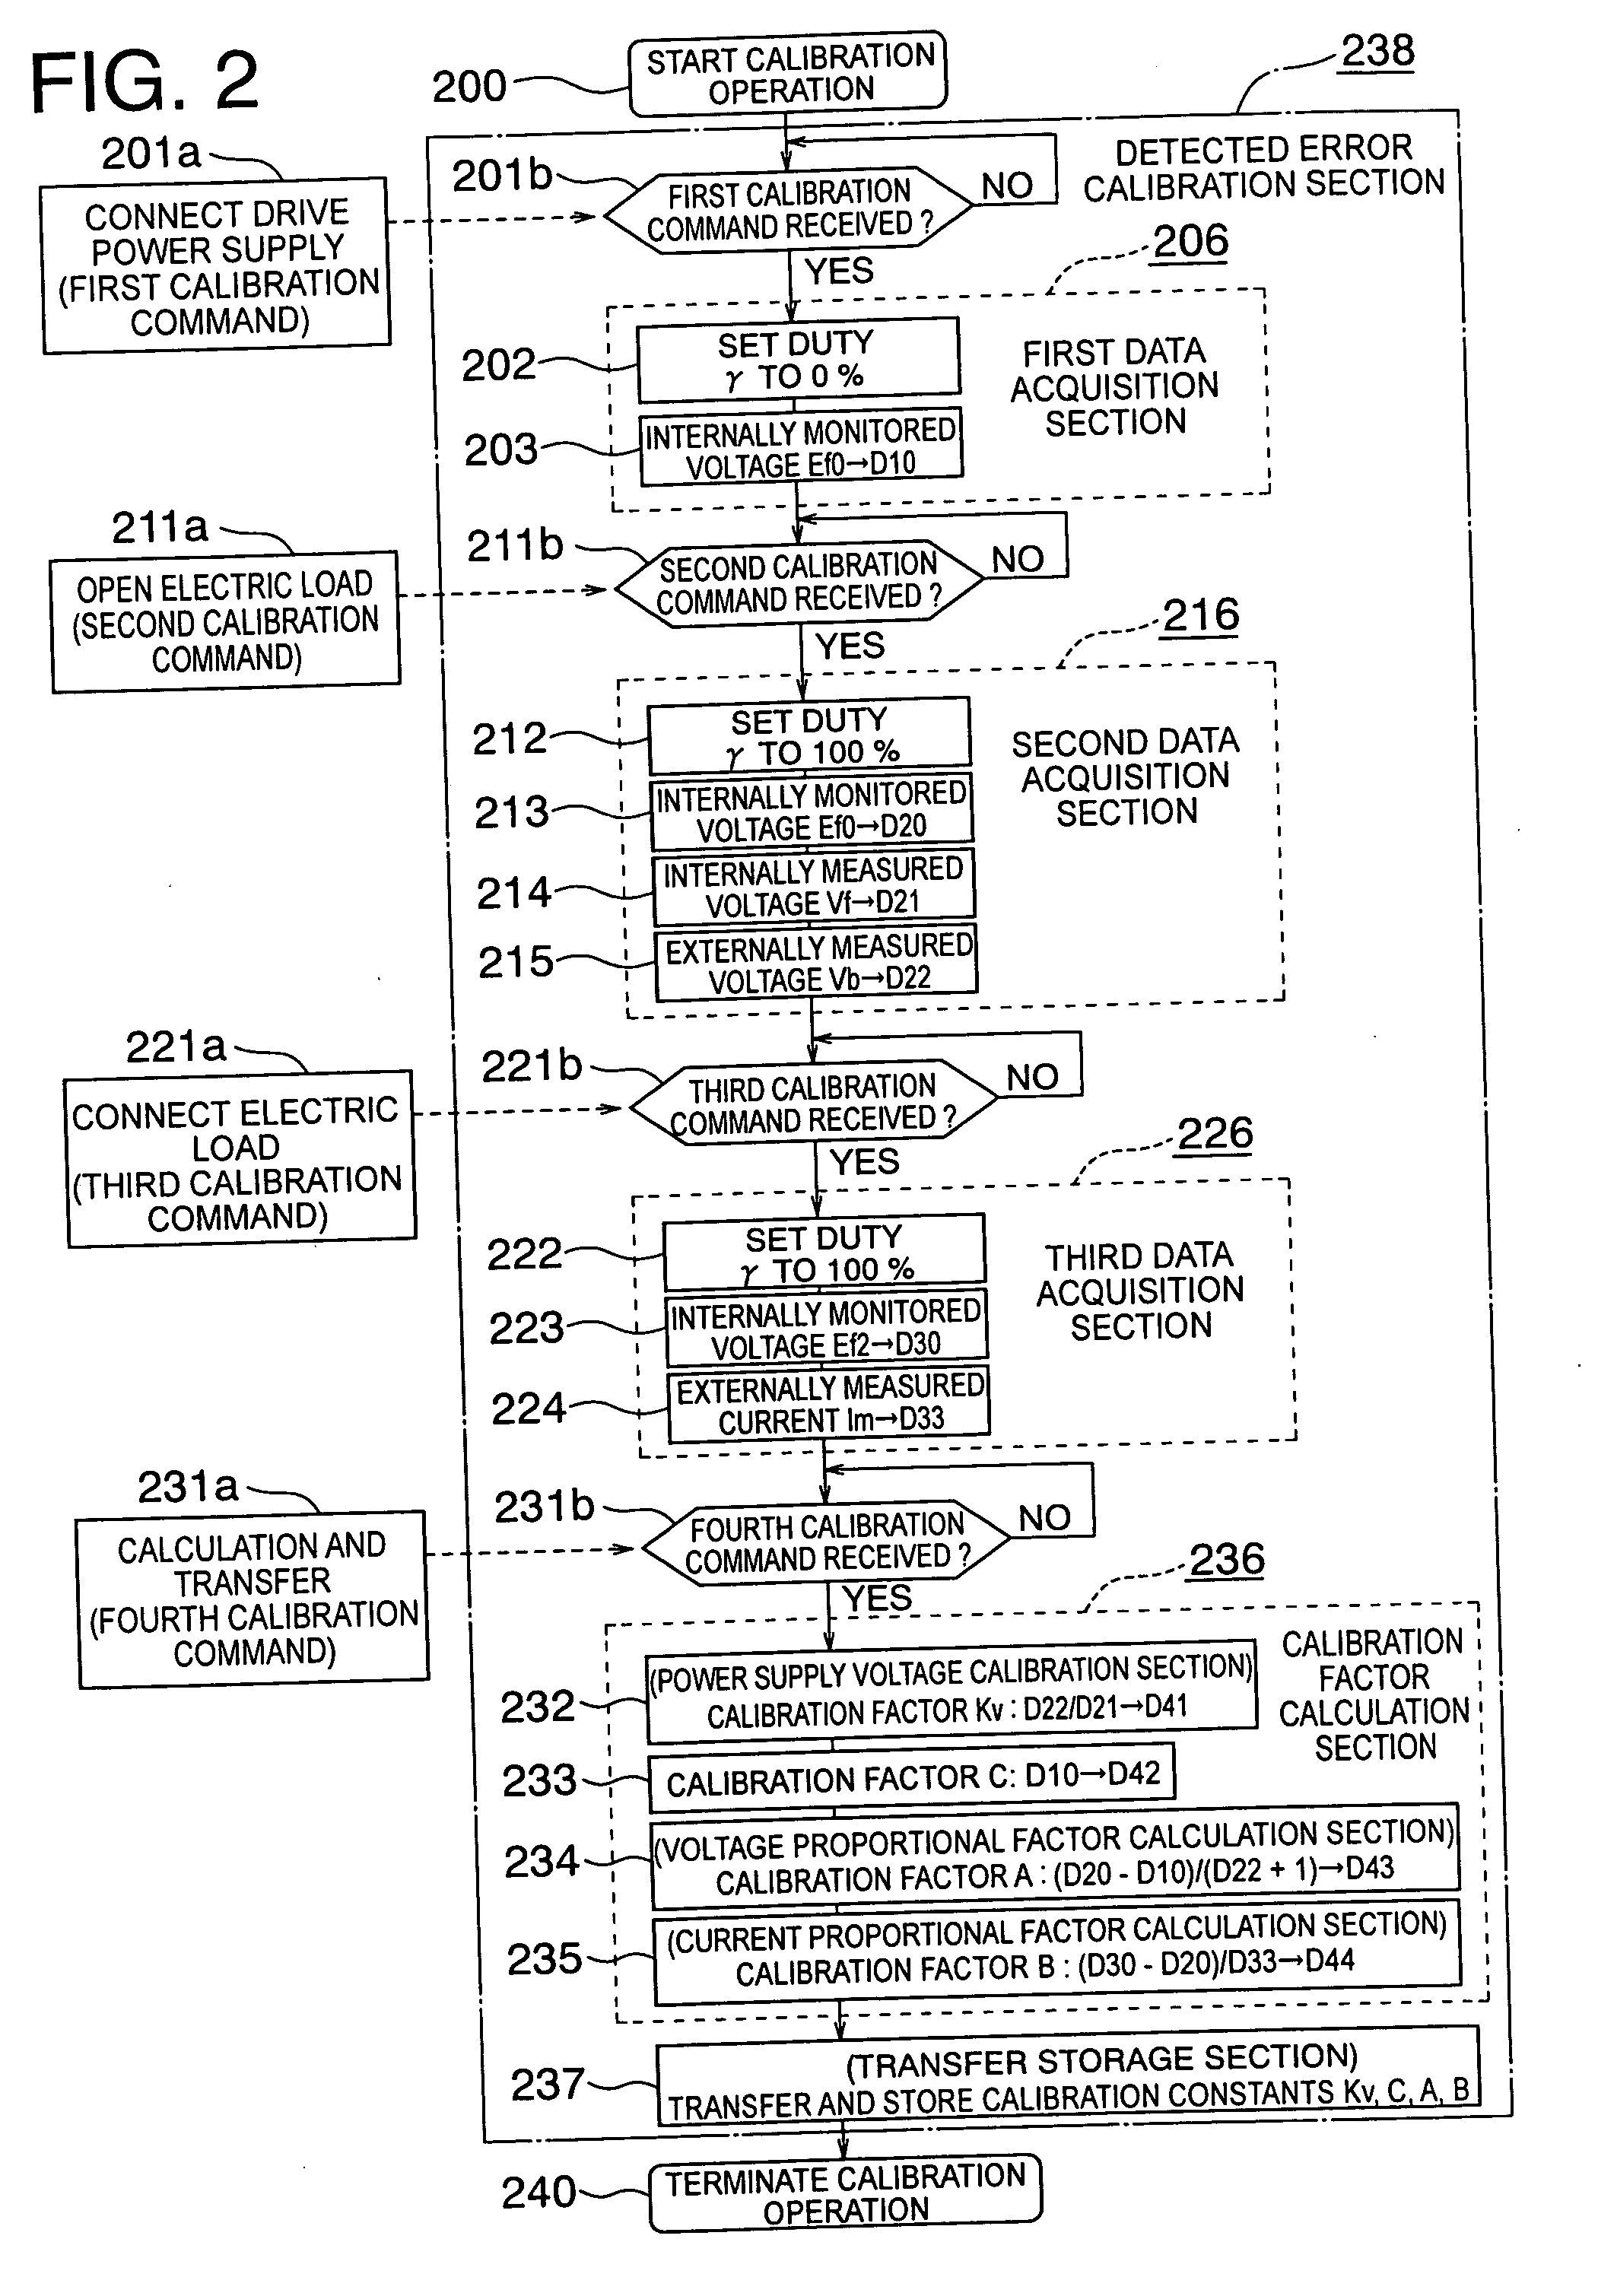 Current control apparatus for electric load